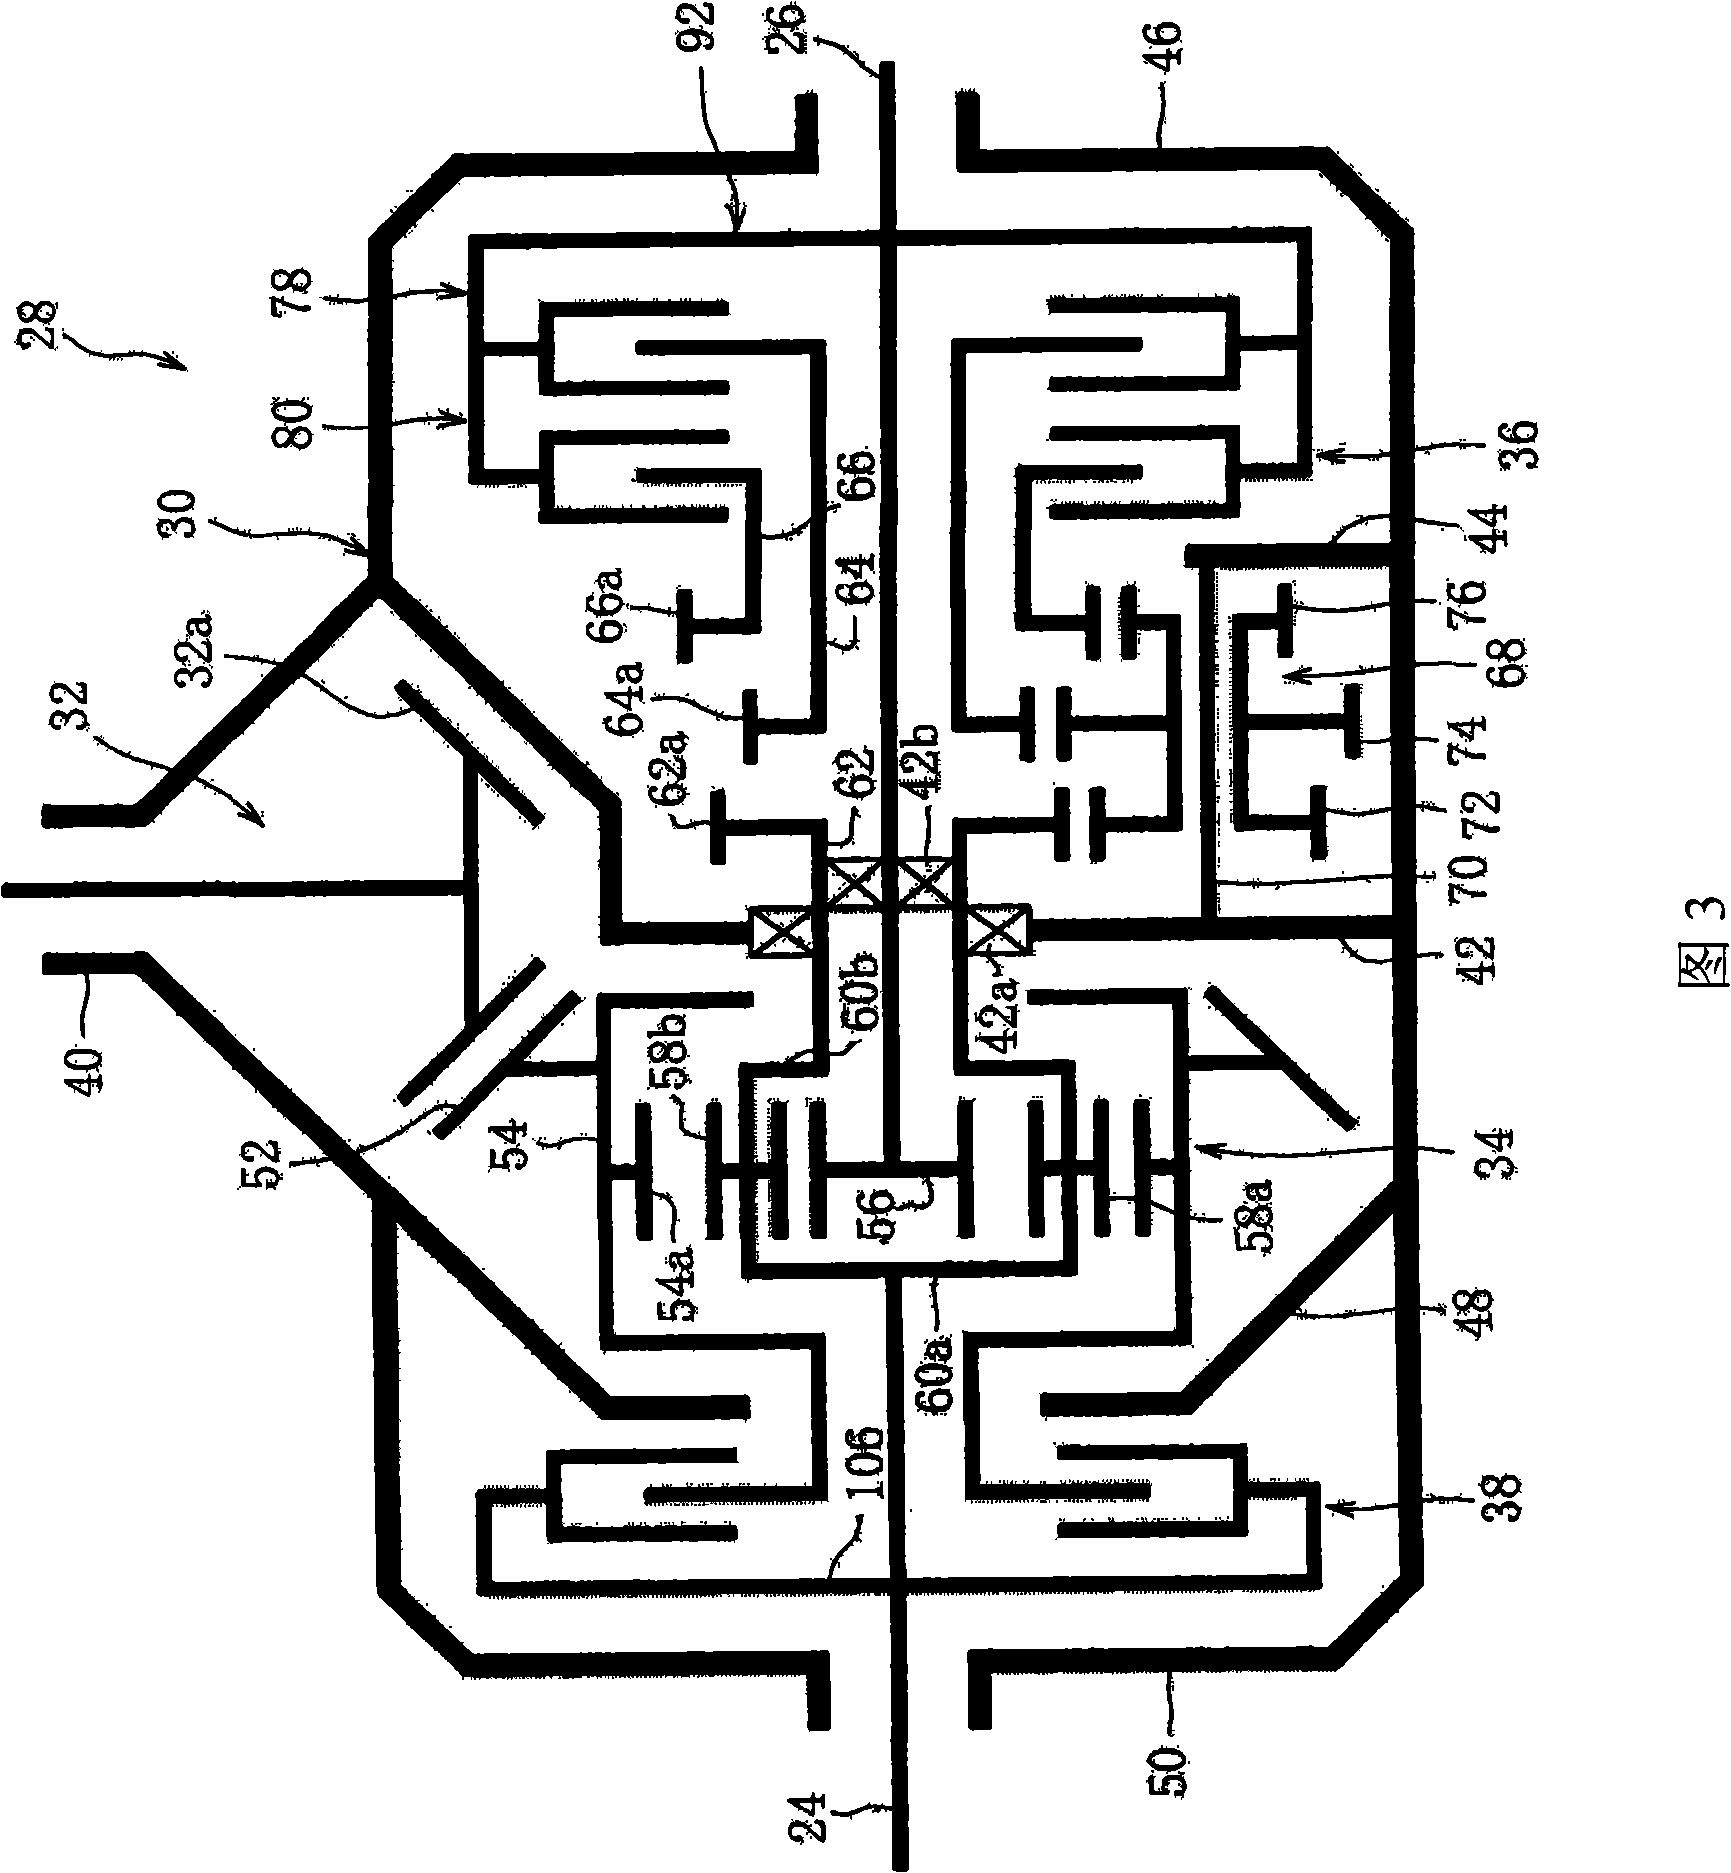 Device operable to distribute driving forces